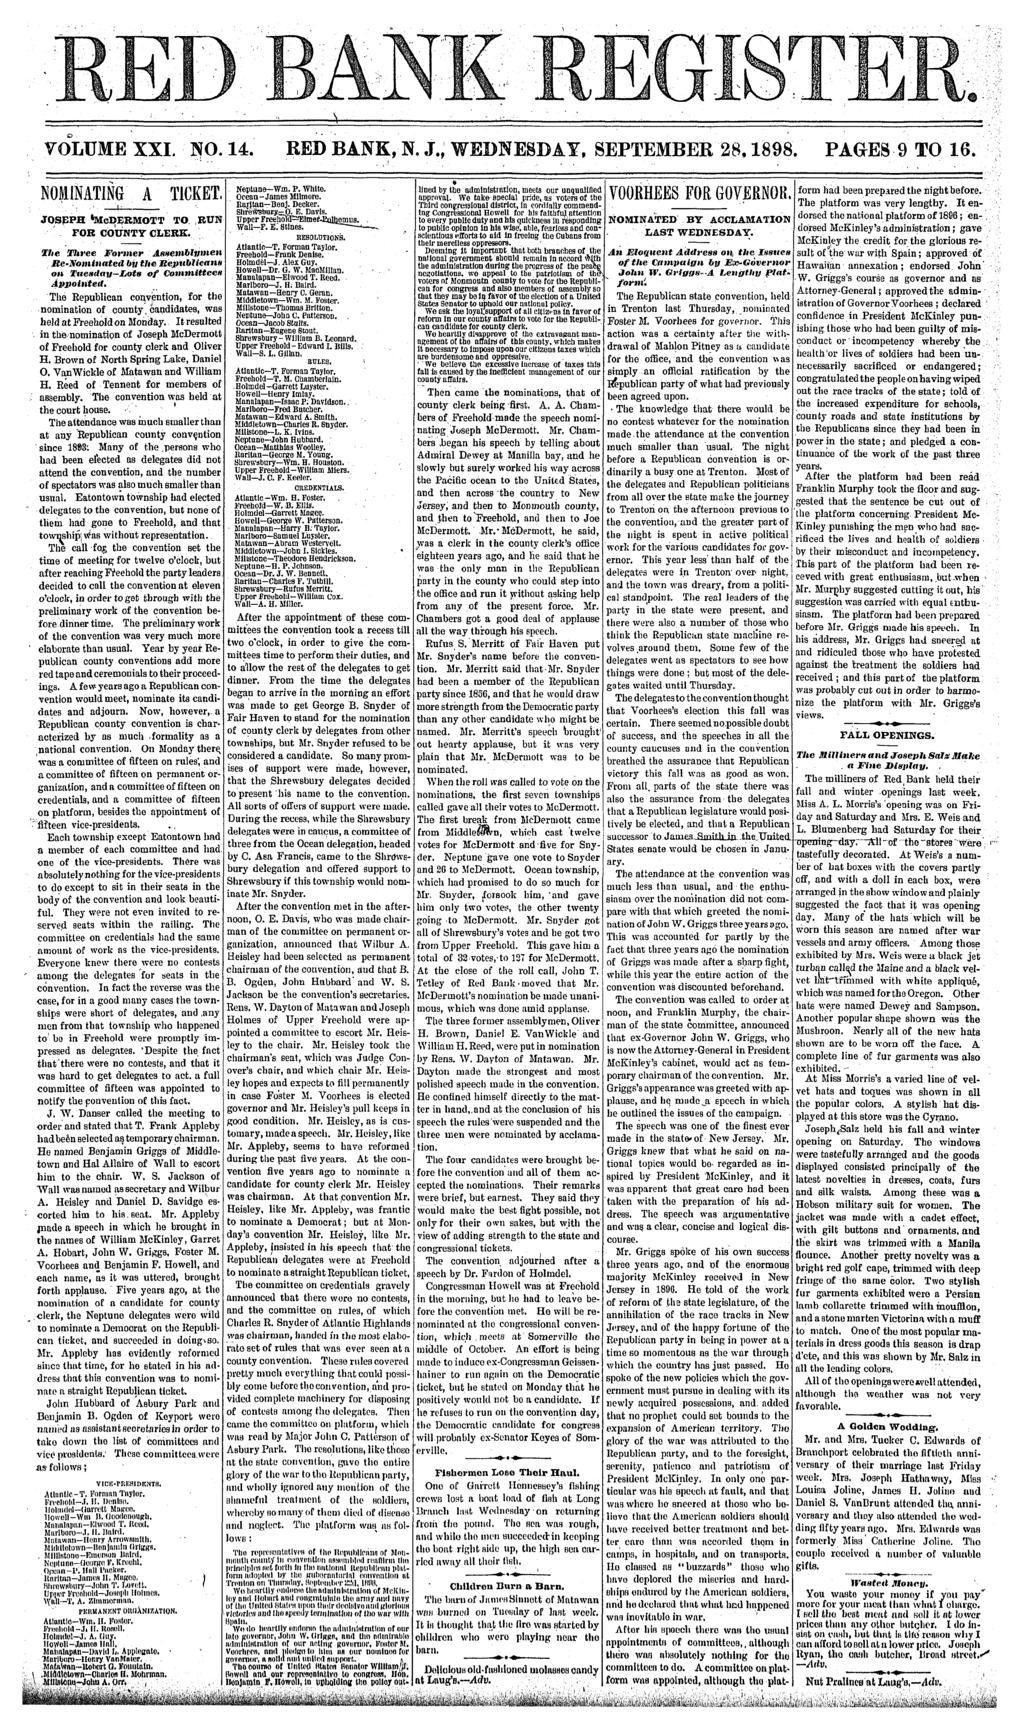 VOLUME XX. NO. 14. RED BANK, N. J., WEDNESDAY, SEPTEMBER 28,1898. PAGES 9 TO 16. NOMNATNG A TCKET, JOSEPH McDERMOTT TO BUN FOB COUNTY CLERK.